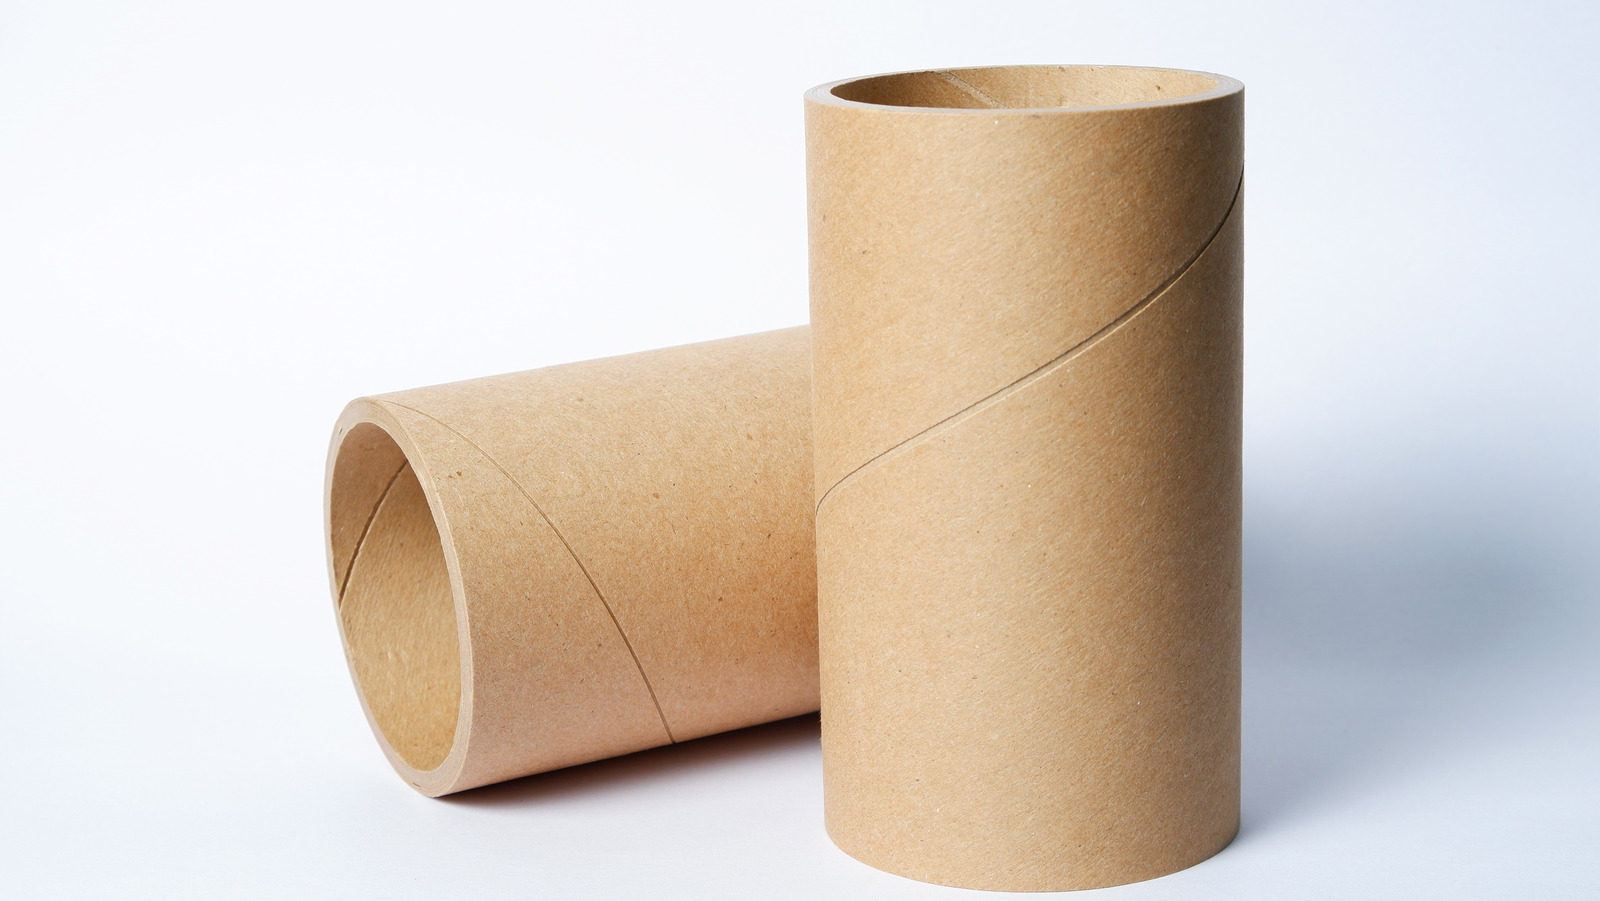 https://www.housedigest.com/img/gallery/5-functional-ways-to-reuse-toilet-paper-cardboard-tubes-in-your-house/l-intro-1662739235.jpg